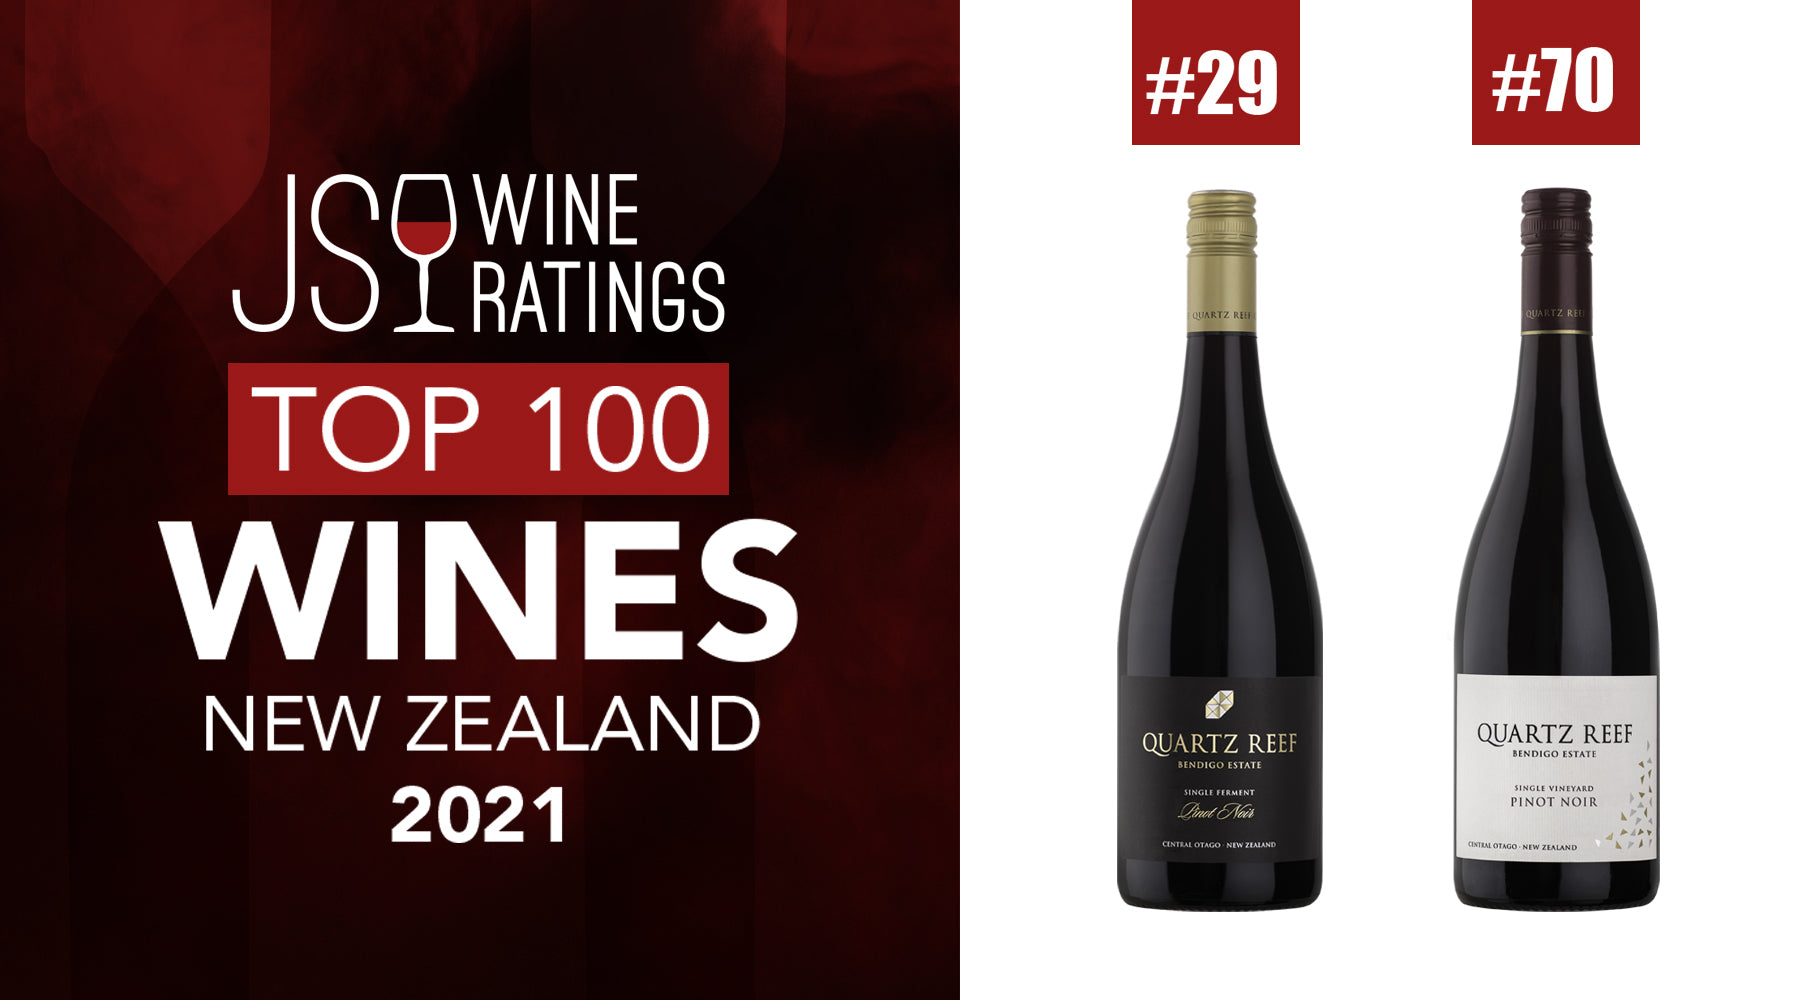 Top 100 Wines of New Zealand Announced!